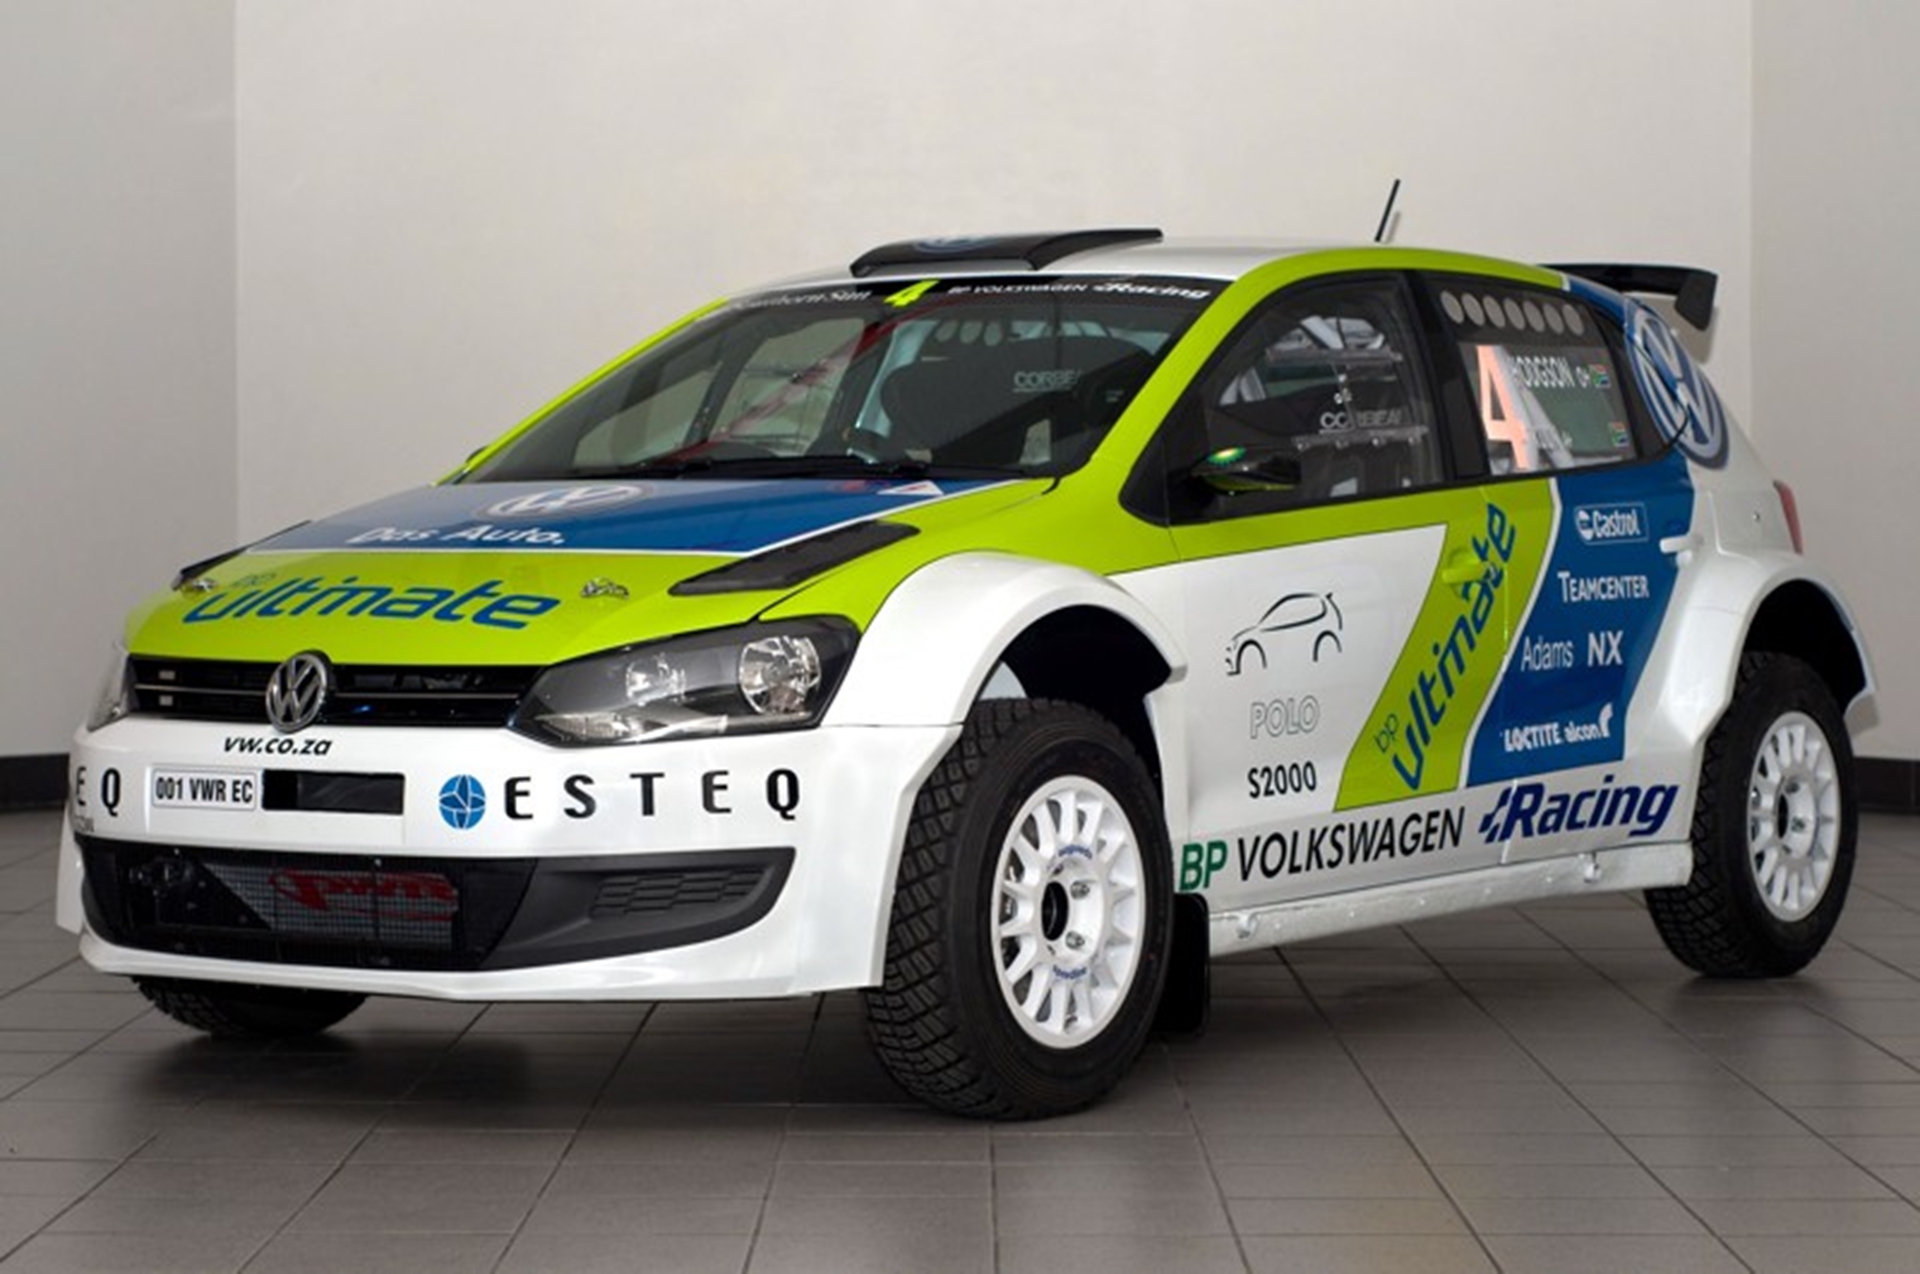 Interesting facts on the BP Volkswagen South Africa Polo S2000 rally car